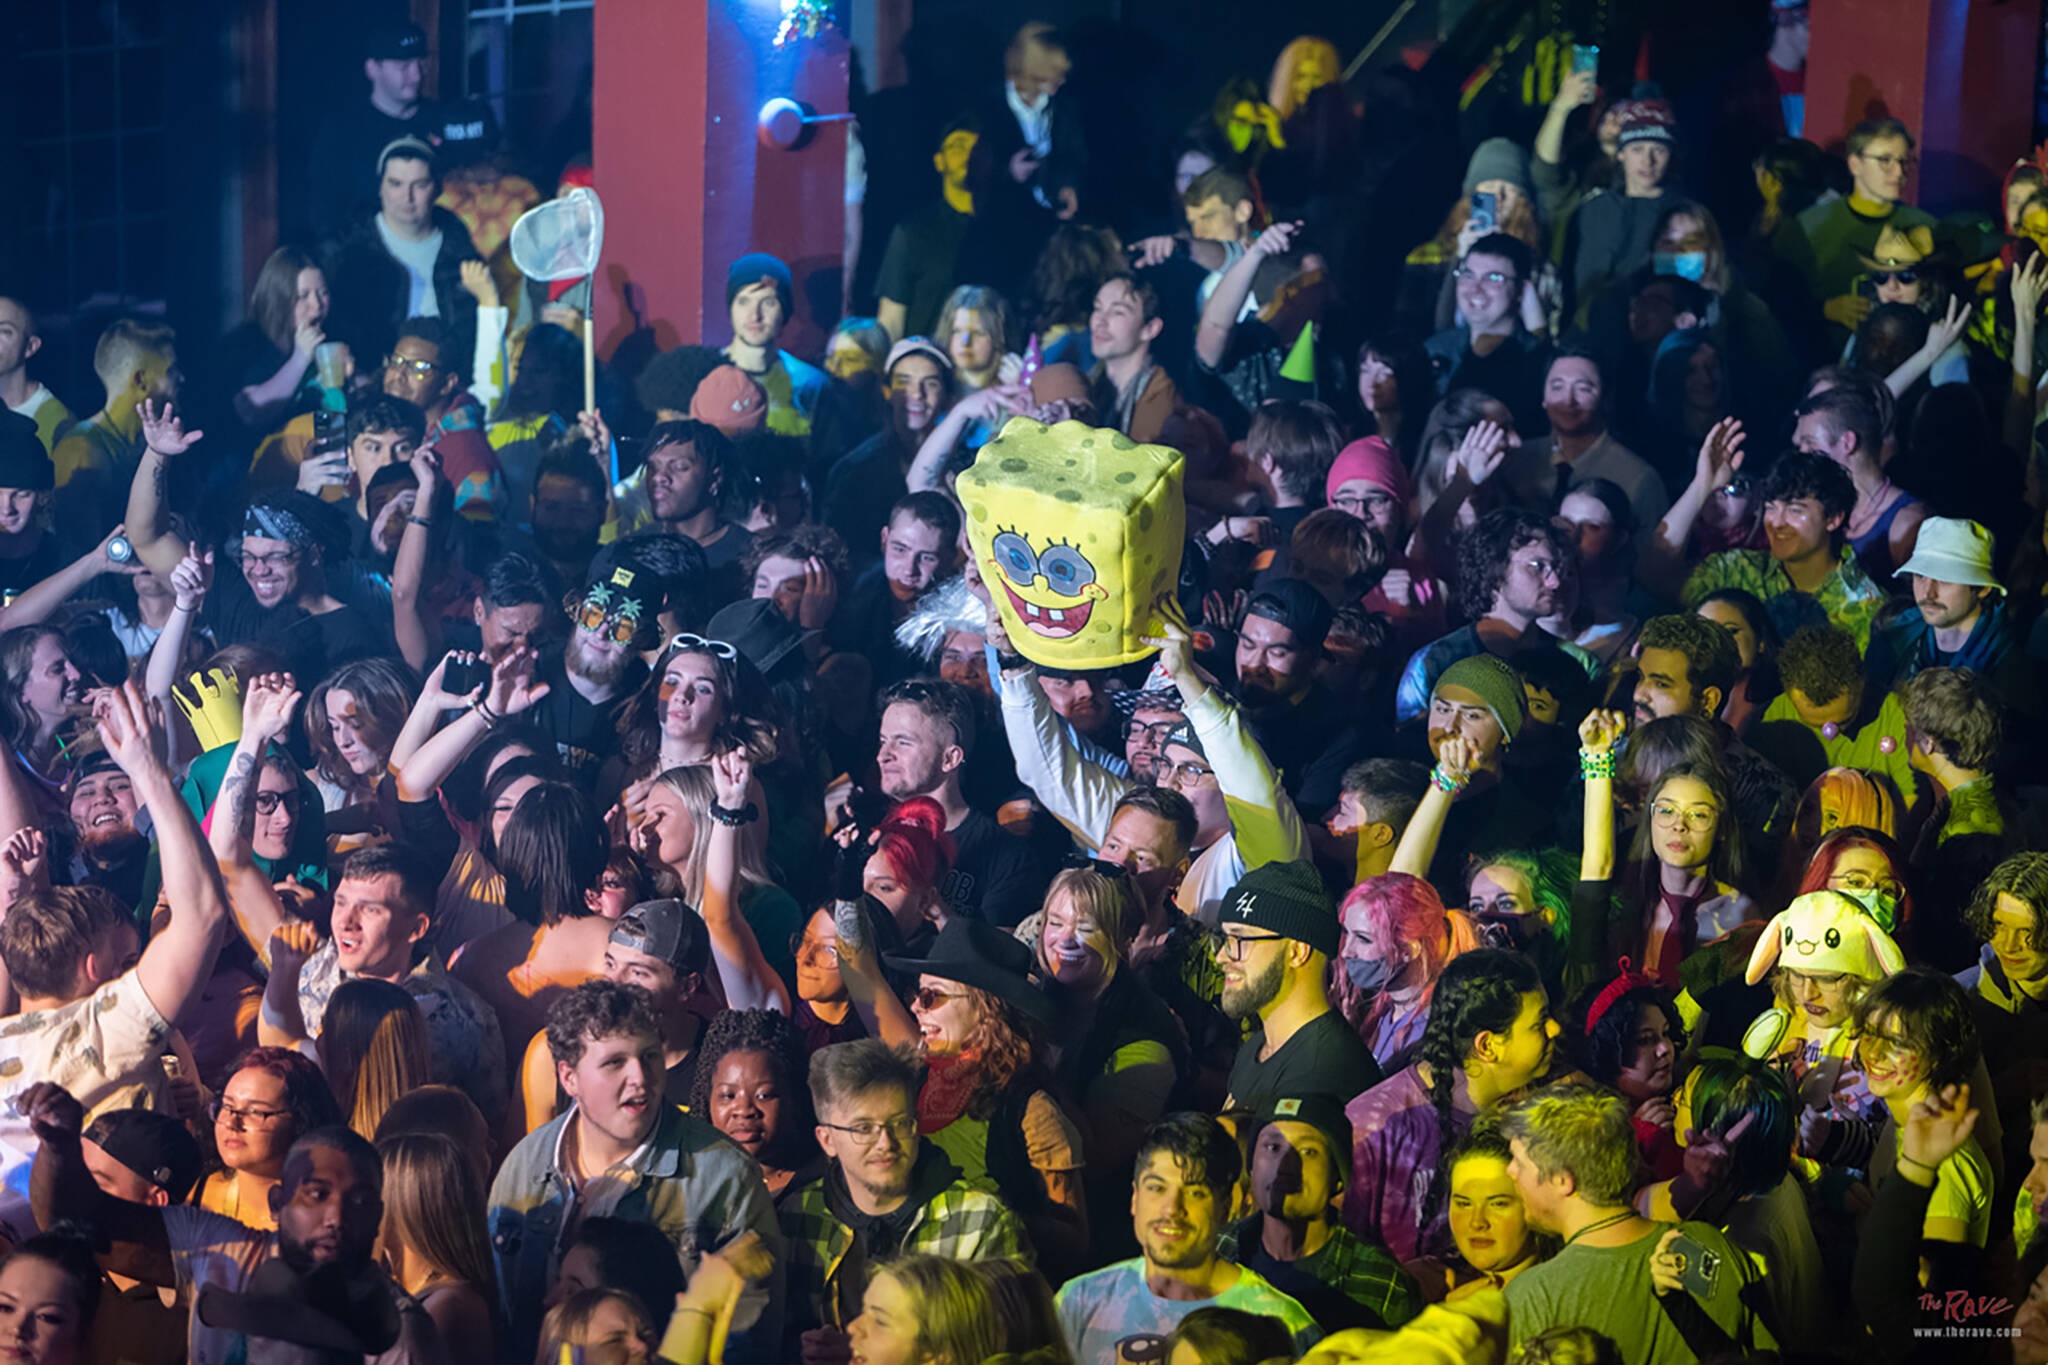 A Spongebobthemed rave is coming to Toronto